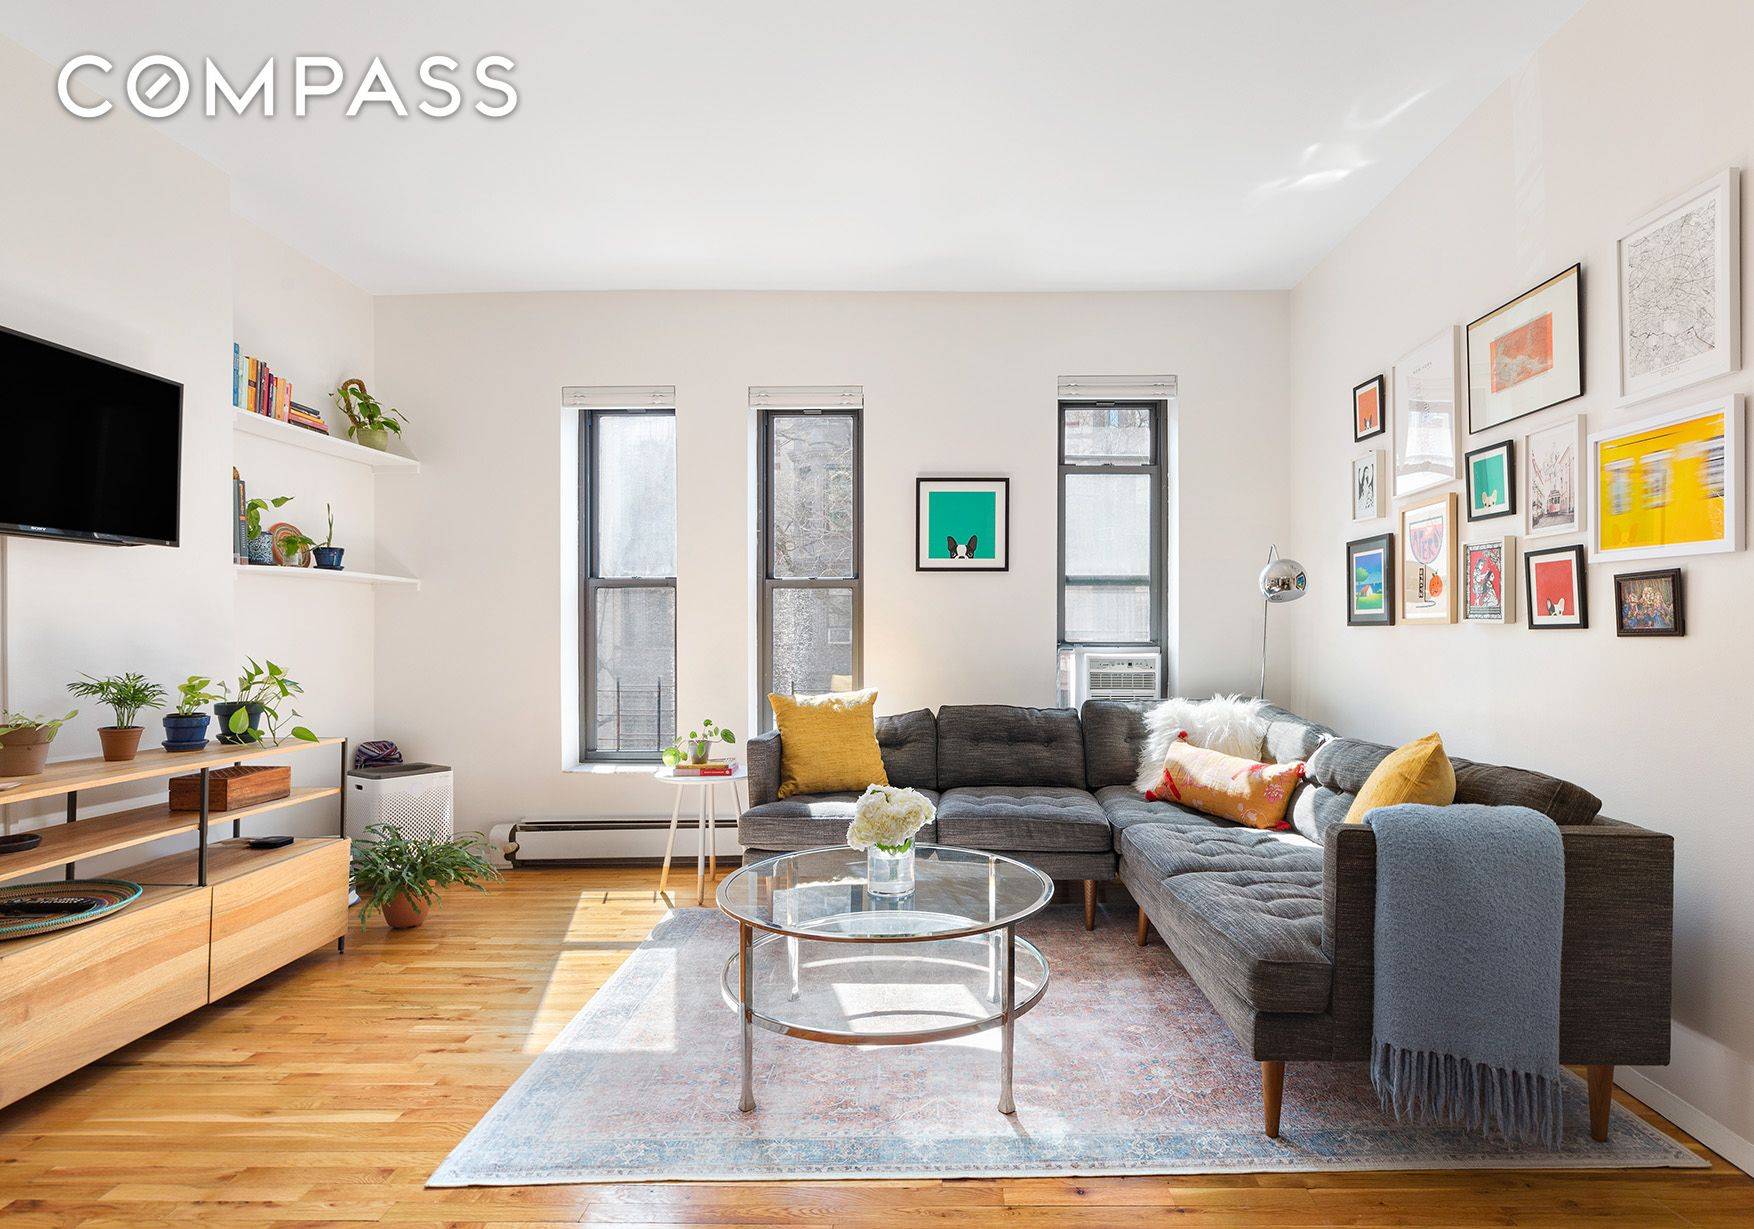 Here comes Sunshine ! Welcome home to your bright and airy oversized and updated one bedroom in the heart of Park Slope !